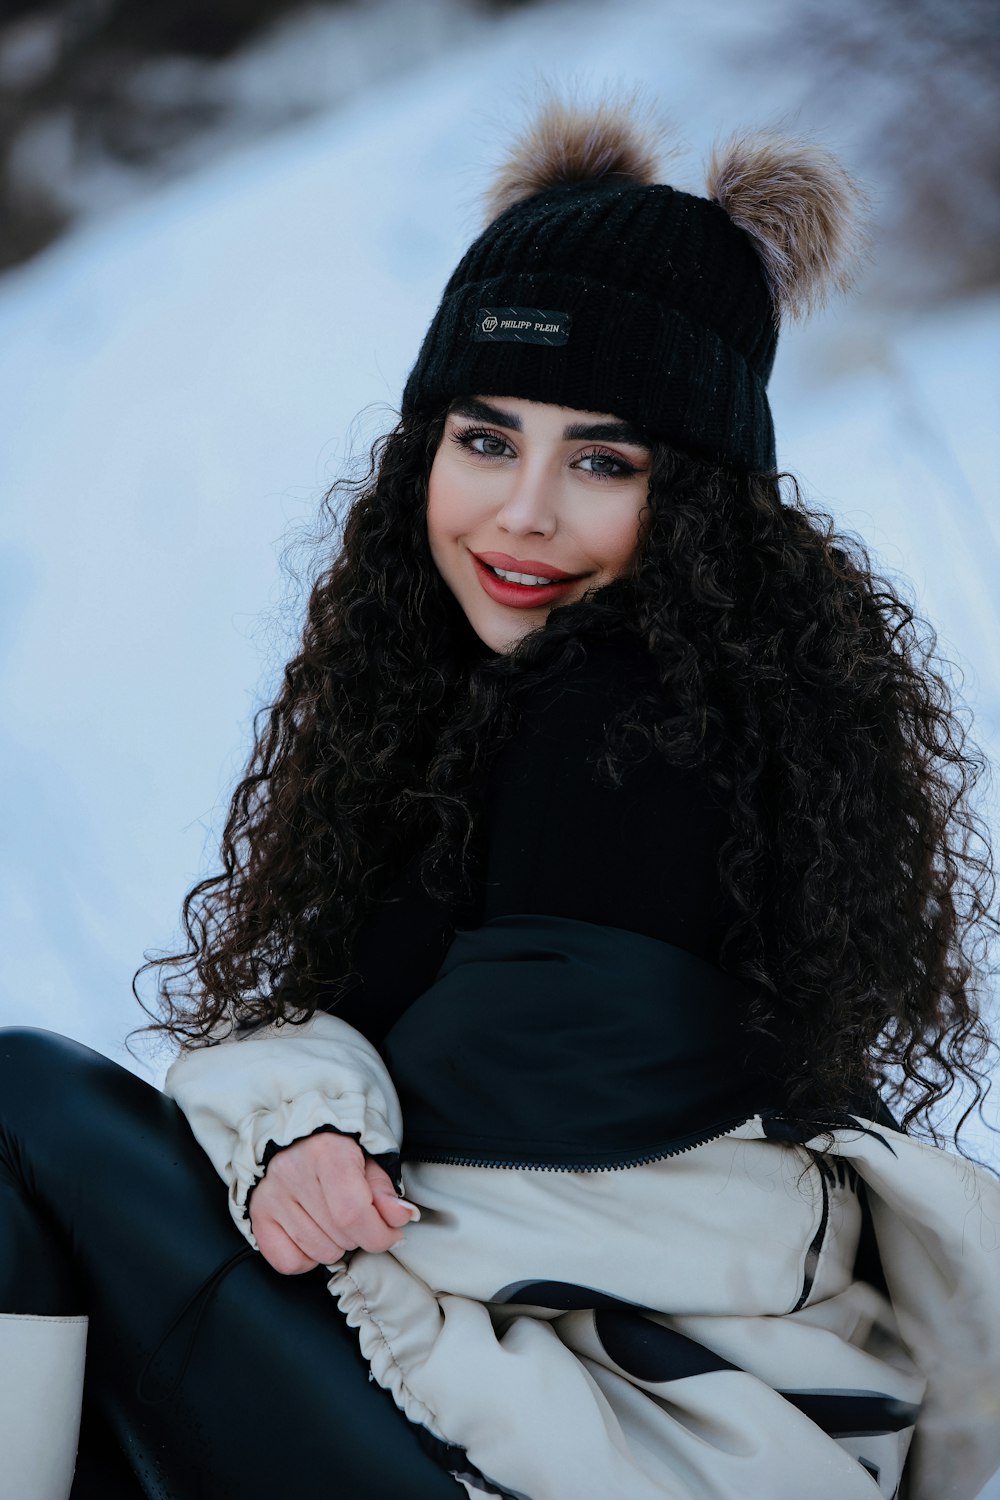 a woman sitting in the snow wearing a black hat